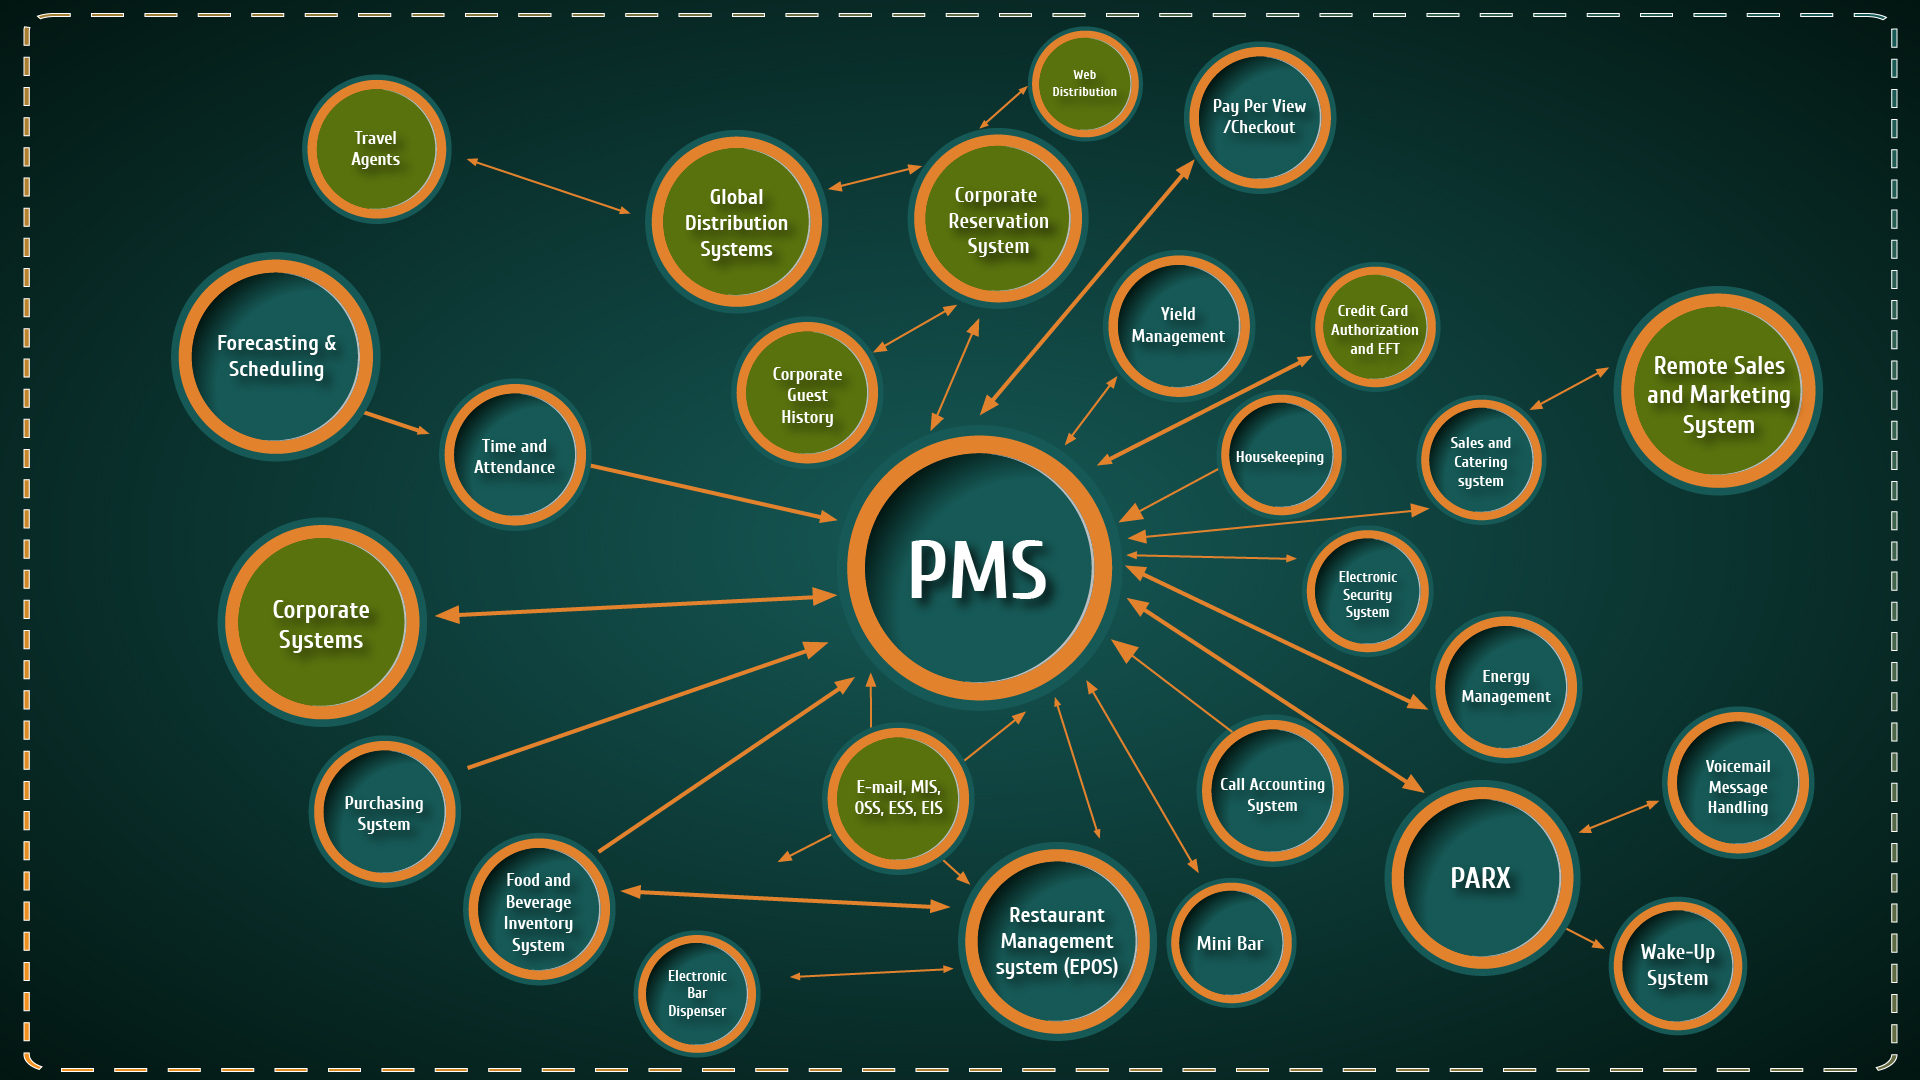 Knowing these problems, means knowing how good is your PMS for your hotel a...